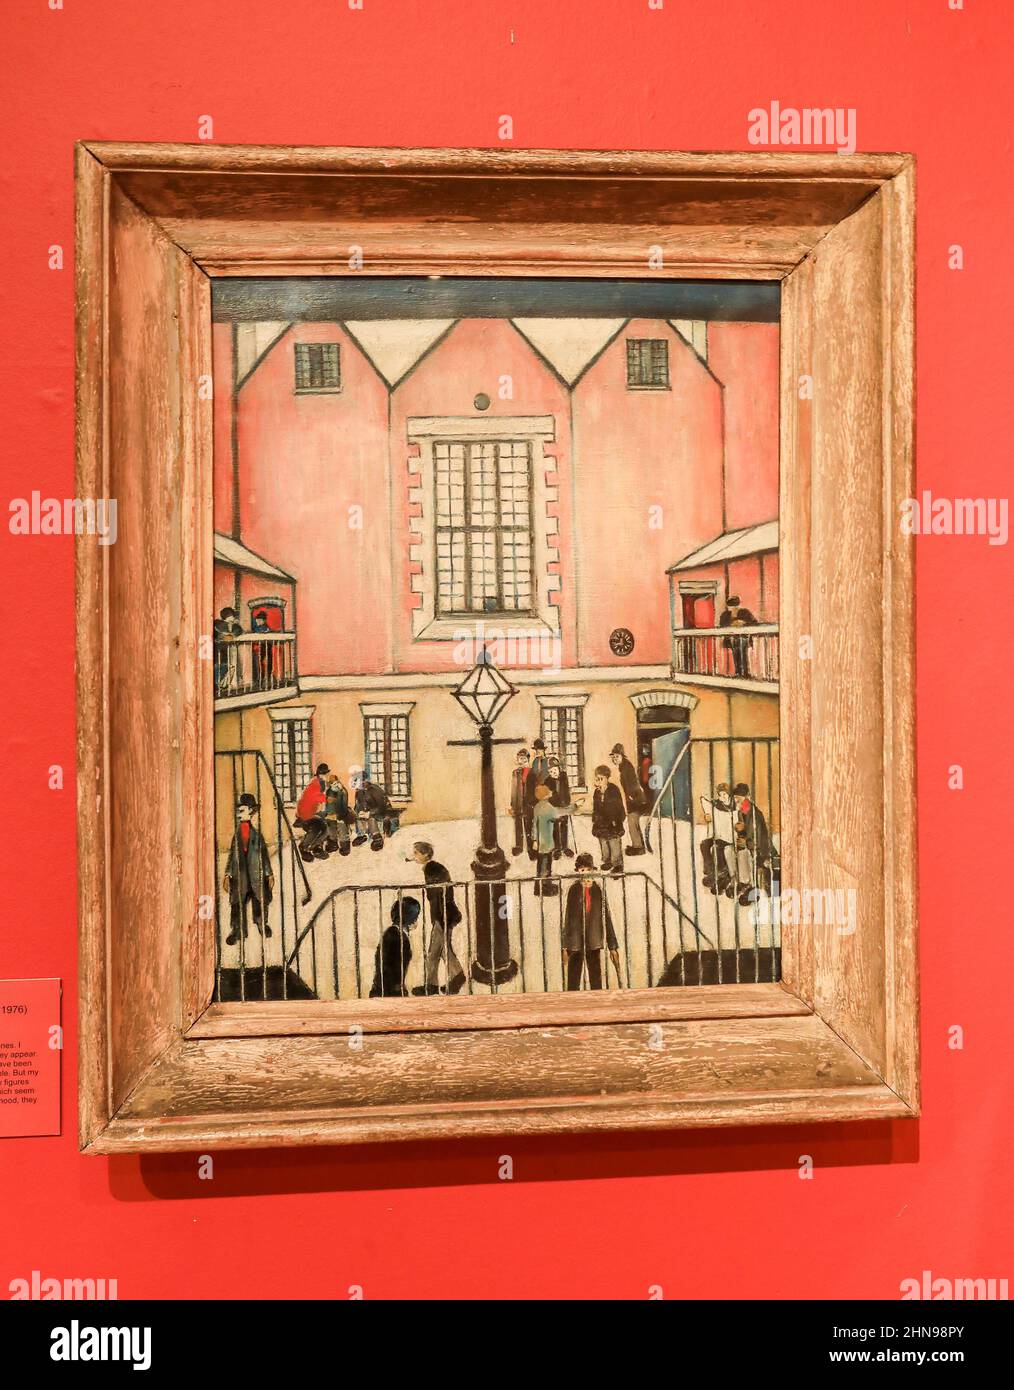 A picture called 'The Courtyard' by L. S. Lowry at the Potteries Museum and Art Gallery, Hanley, Stoke-on-Trent, Staffs, England, UK Stock Photo